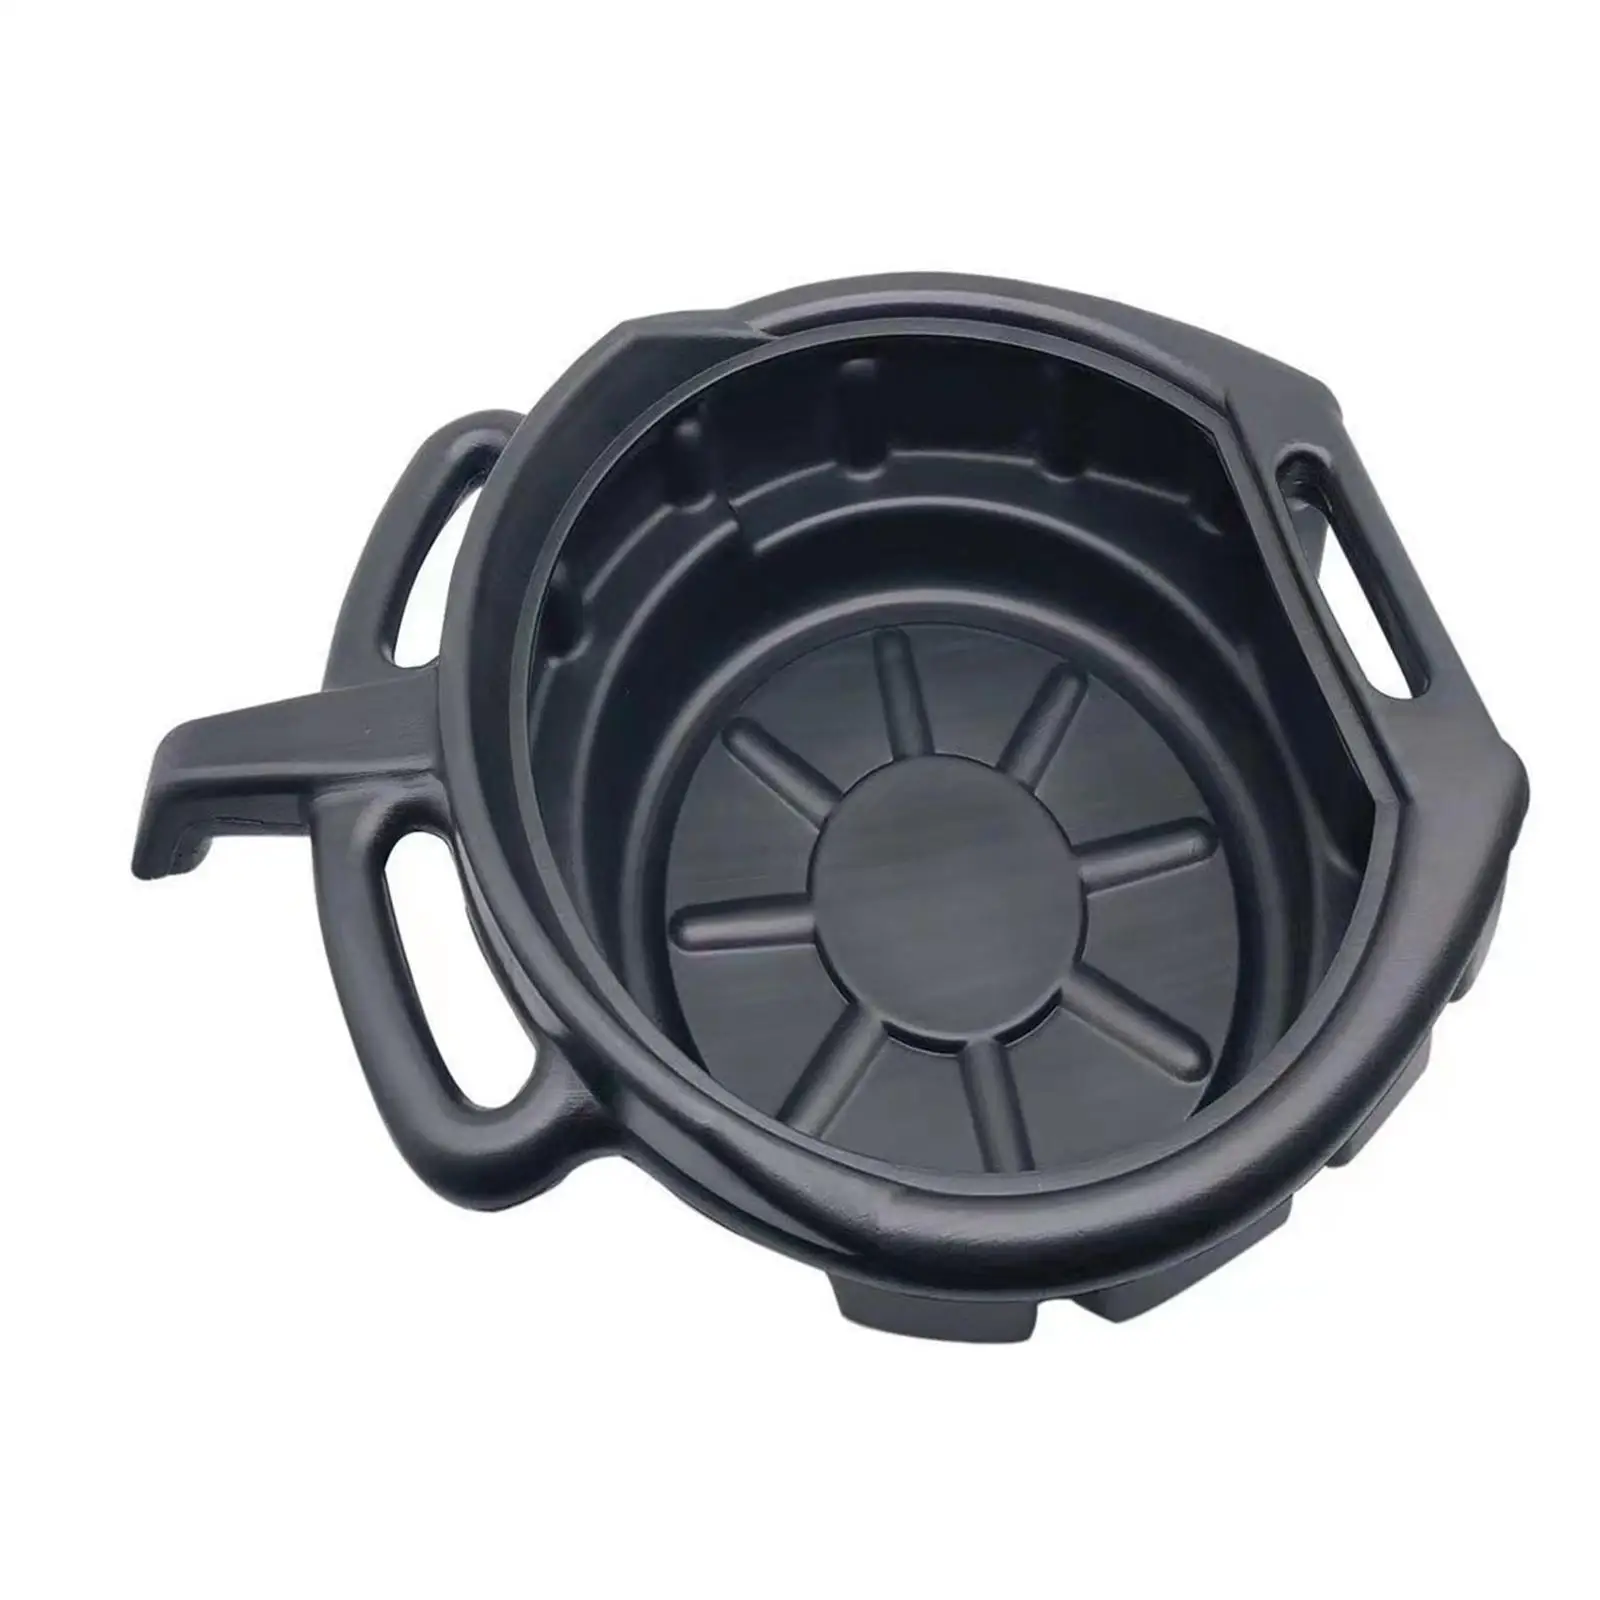 Oil Drain Can Tray Oil Catches Can Reservoir Tank Universal Multifunction Drain Pan Garage Tool for Vehicle Boat Car Workshop